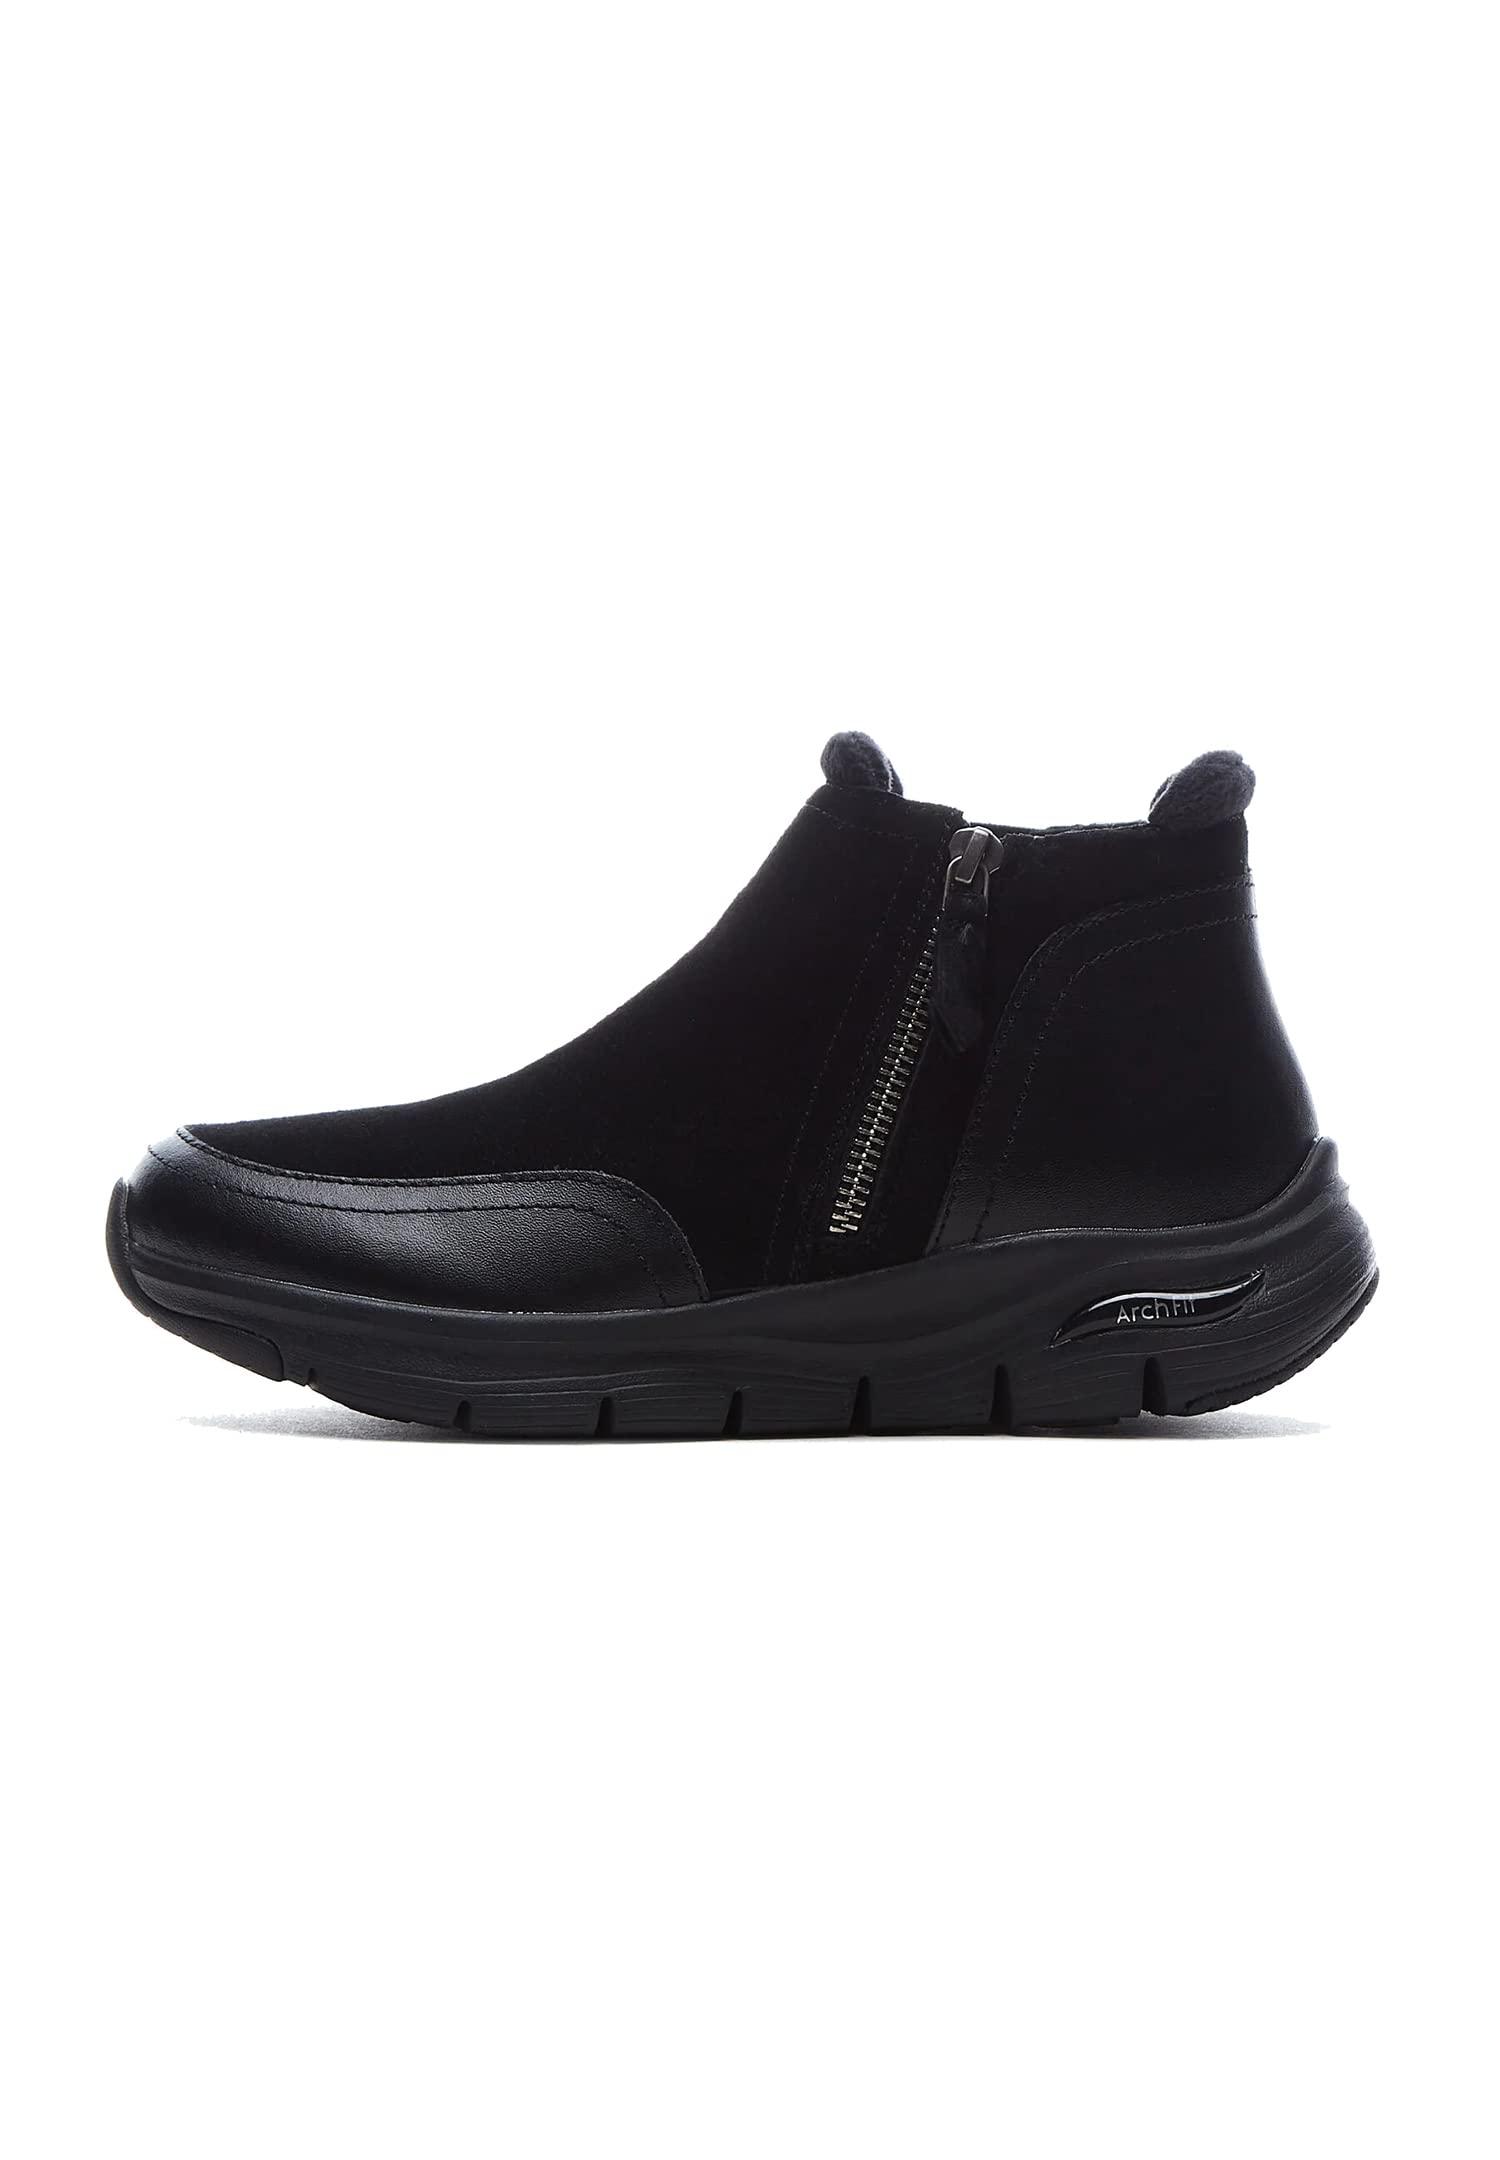 Skechers Arch Fit Smooth Ankle Boot Memory Foam in Black | Lyst UK